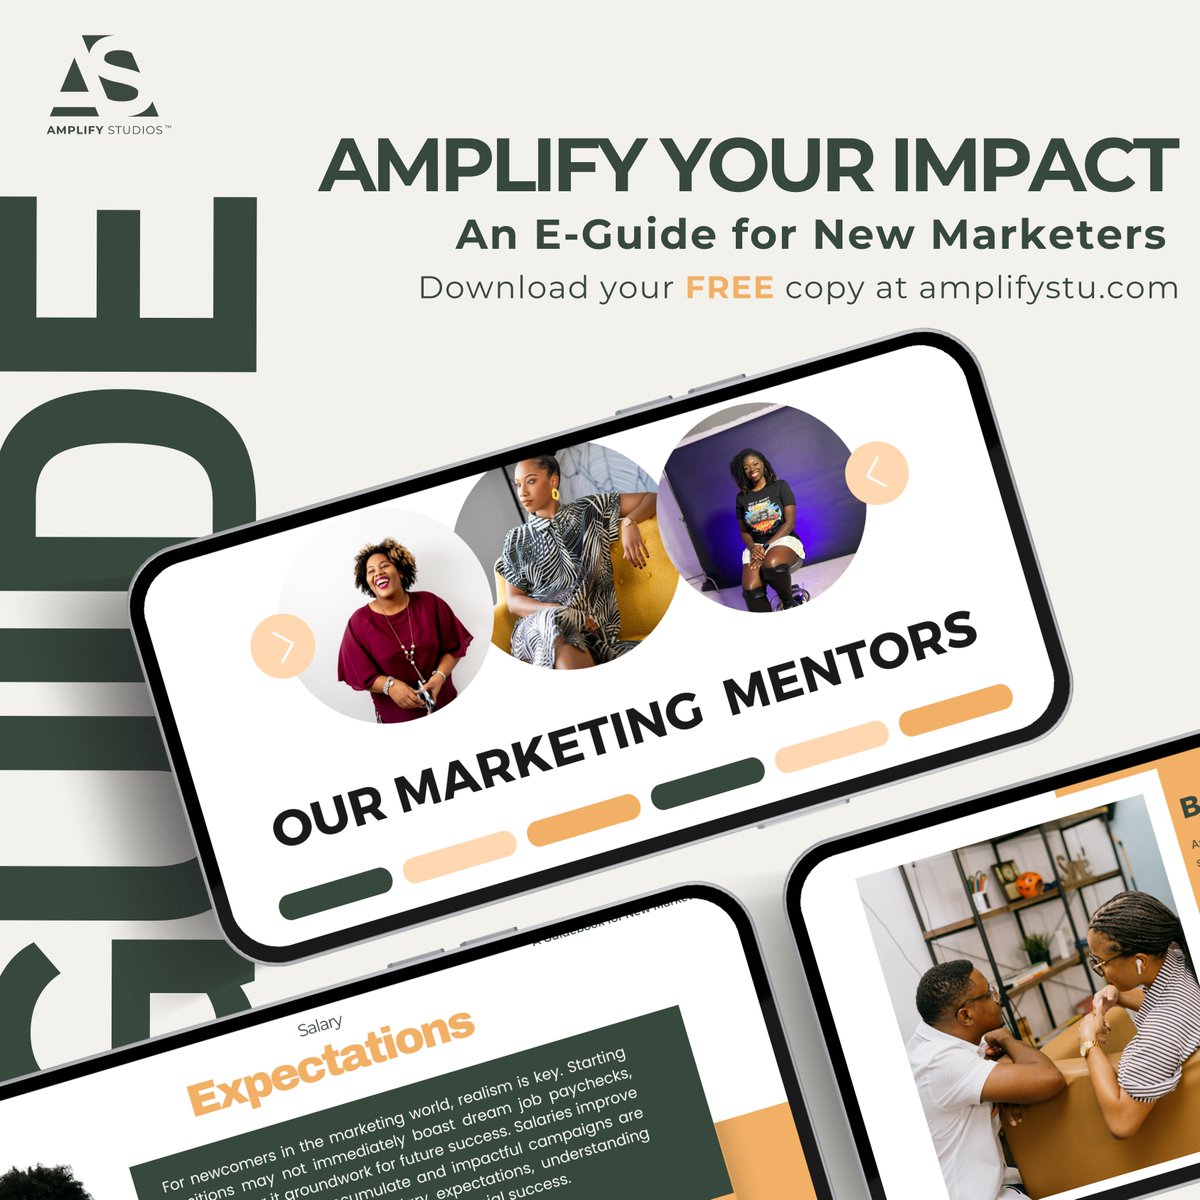 Excited to share our new E-Guide for new marketers! Learn marketing basics, salary expectations & more. Free download at amplifystu.com 🙌 #AmplifyStudios #NewMarketersGuide #AmplifyYourImpact